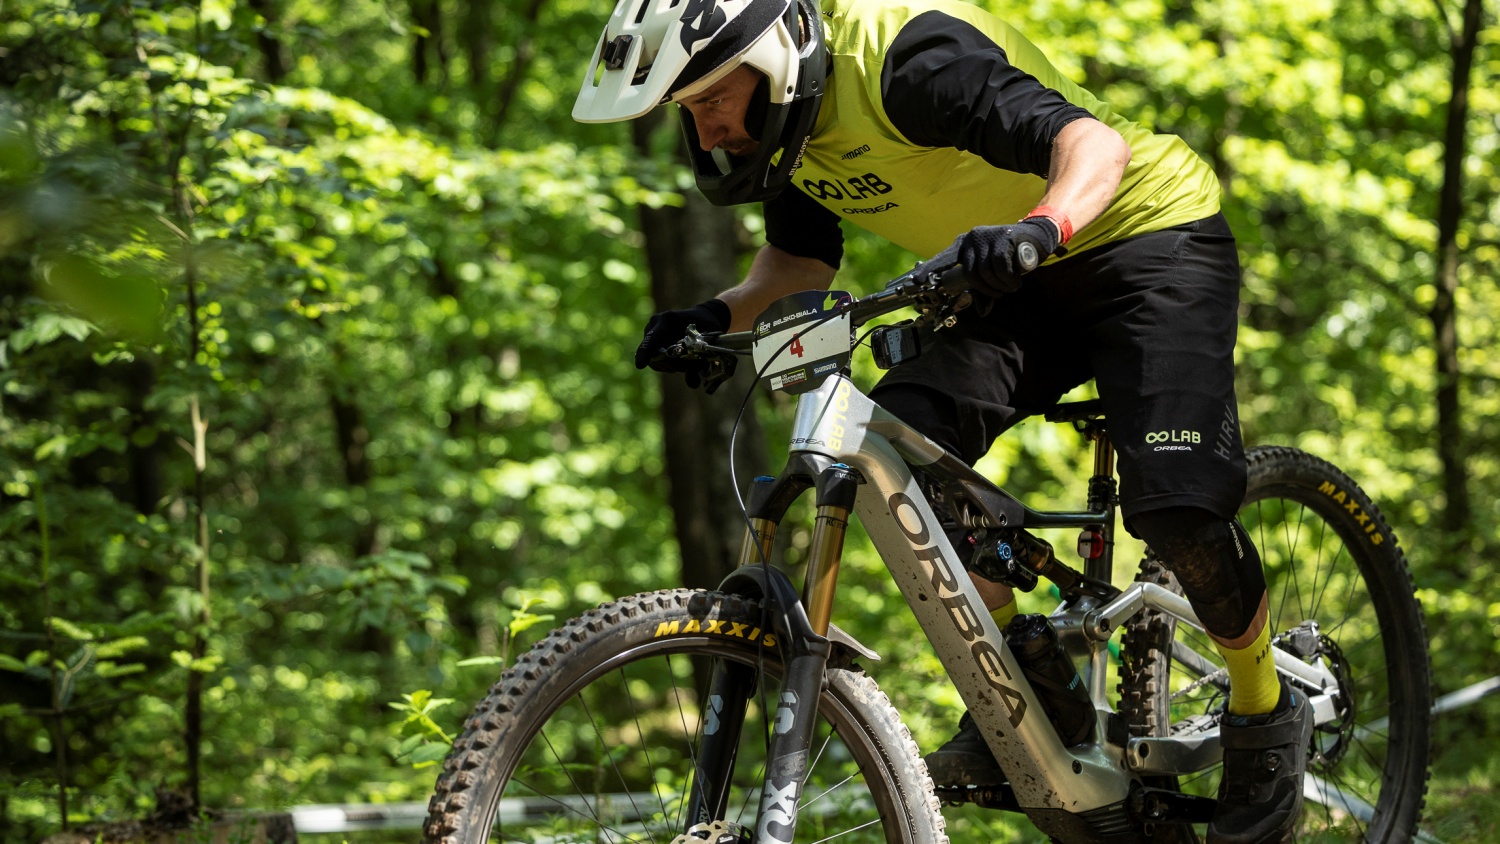 Orbea’s OOLab and Rotwild Schwalbe Enduro teams took part in the development too.